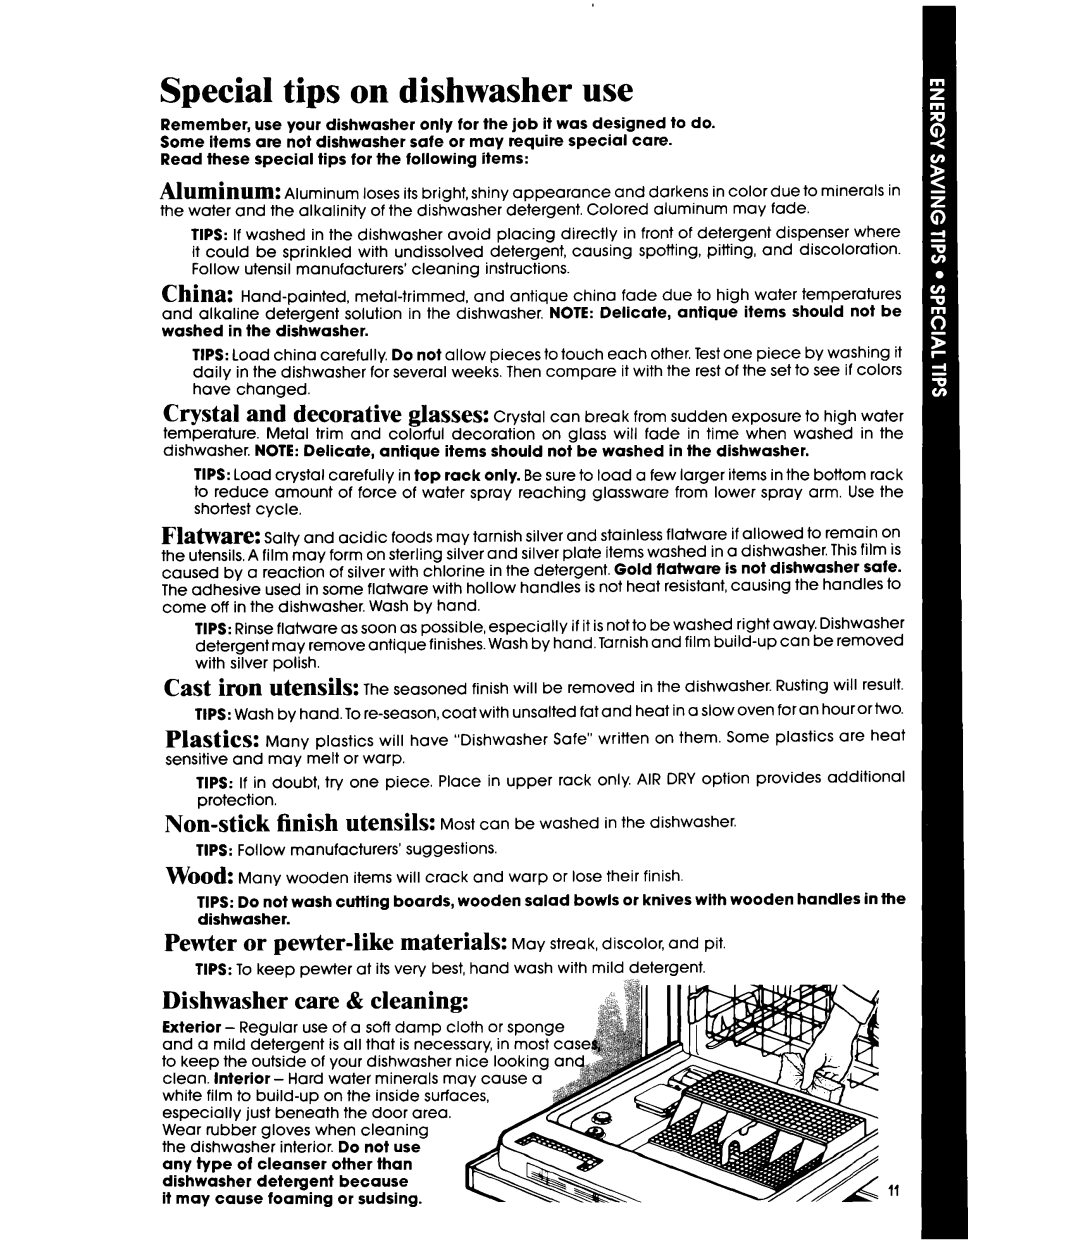 Whirlpool DU87OOXT manual Special tips on dishwasher use, Dishwasher care & cleaning 